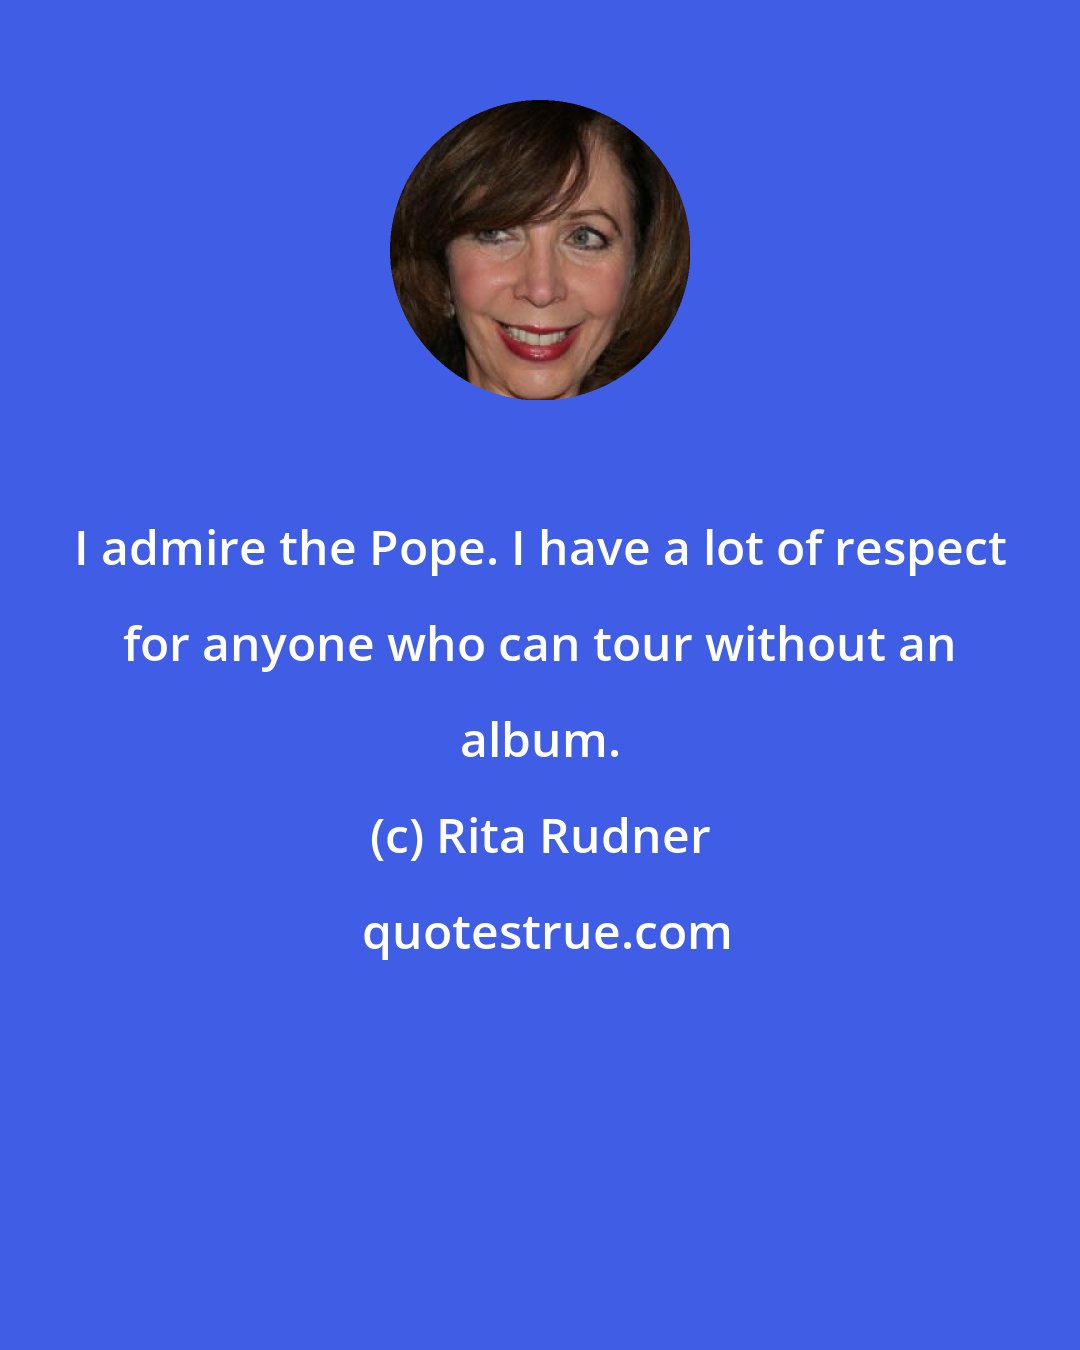 Rita Rudner: I admire the Pope. I have a lot of respect for anyone who can tour without an album.